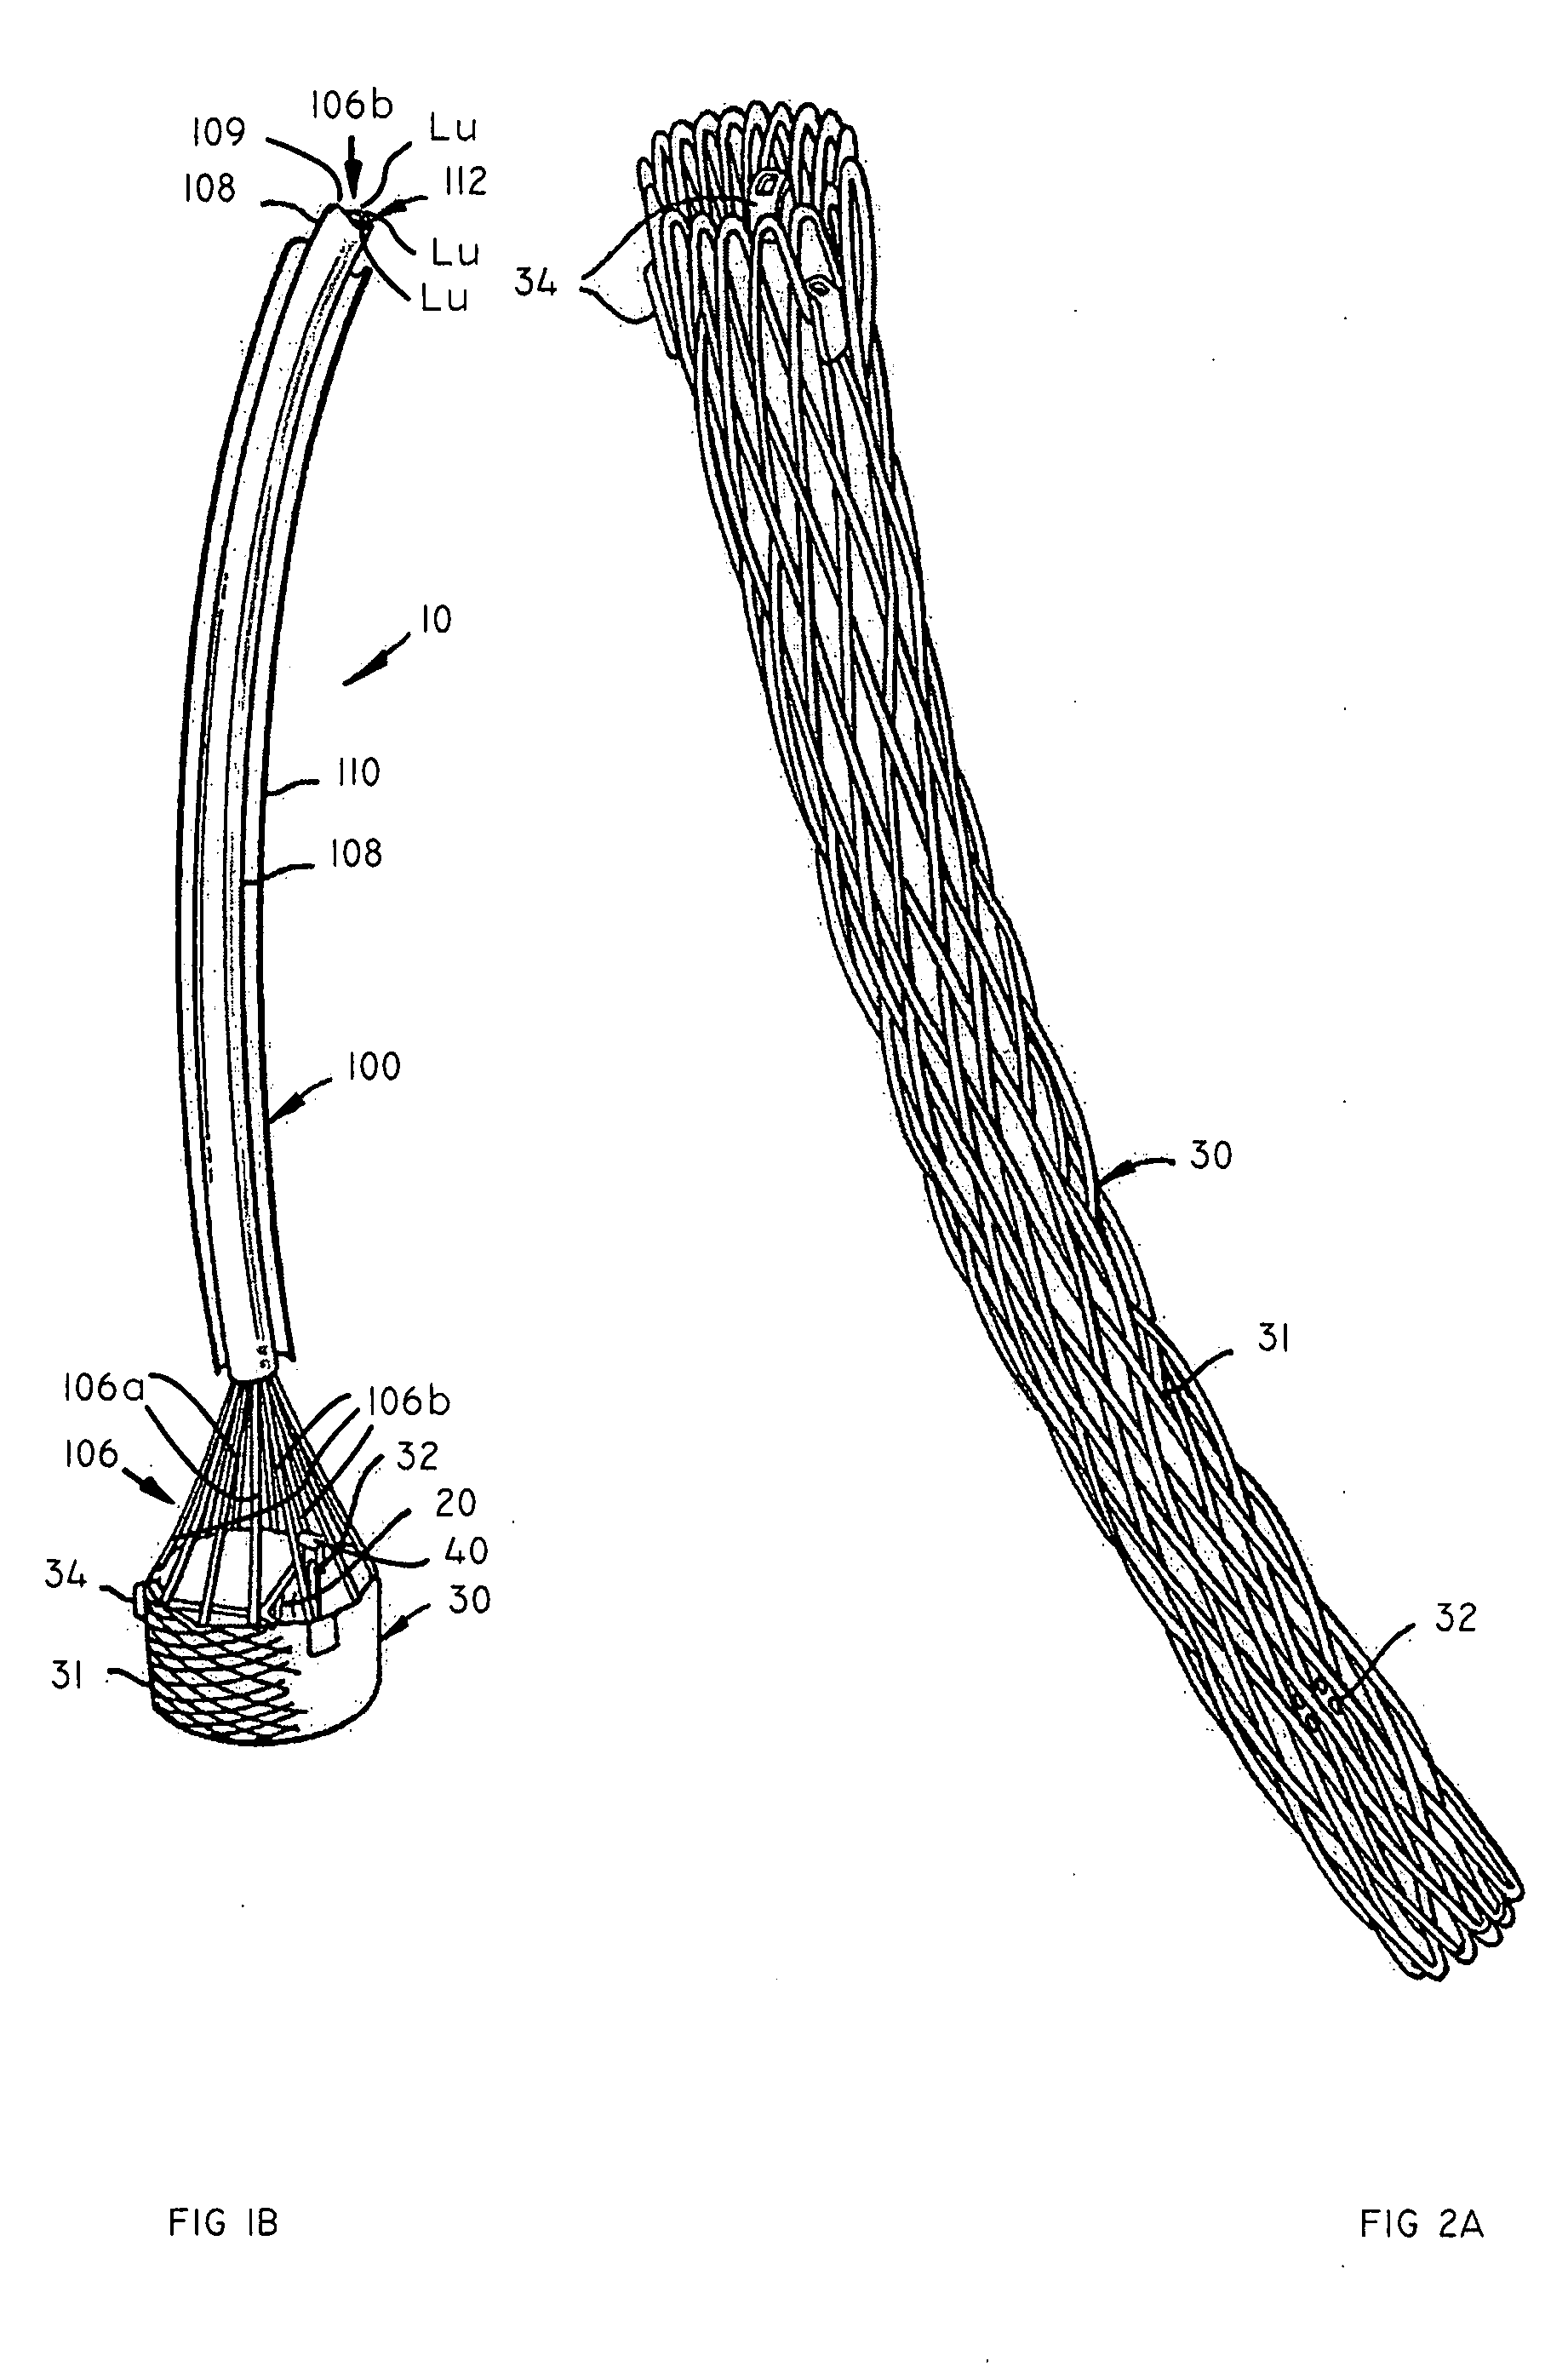 Systems and methods for delivering a medical implant